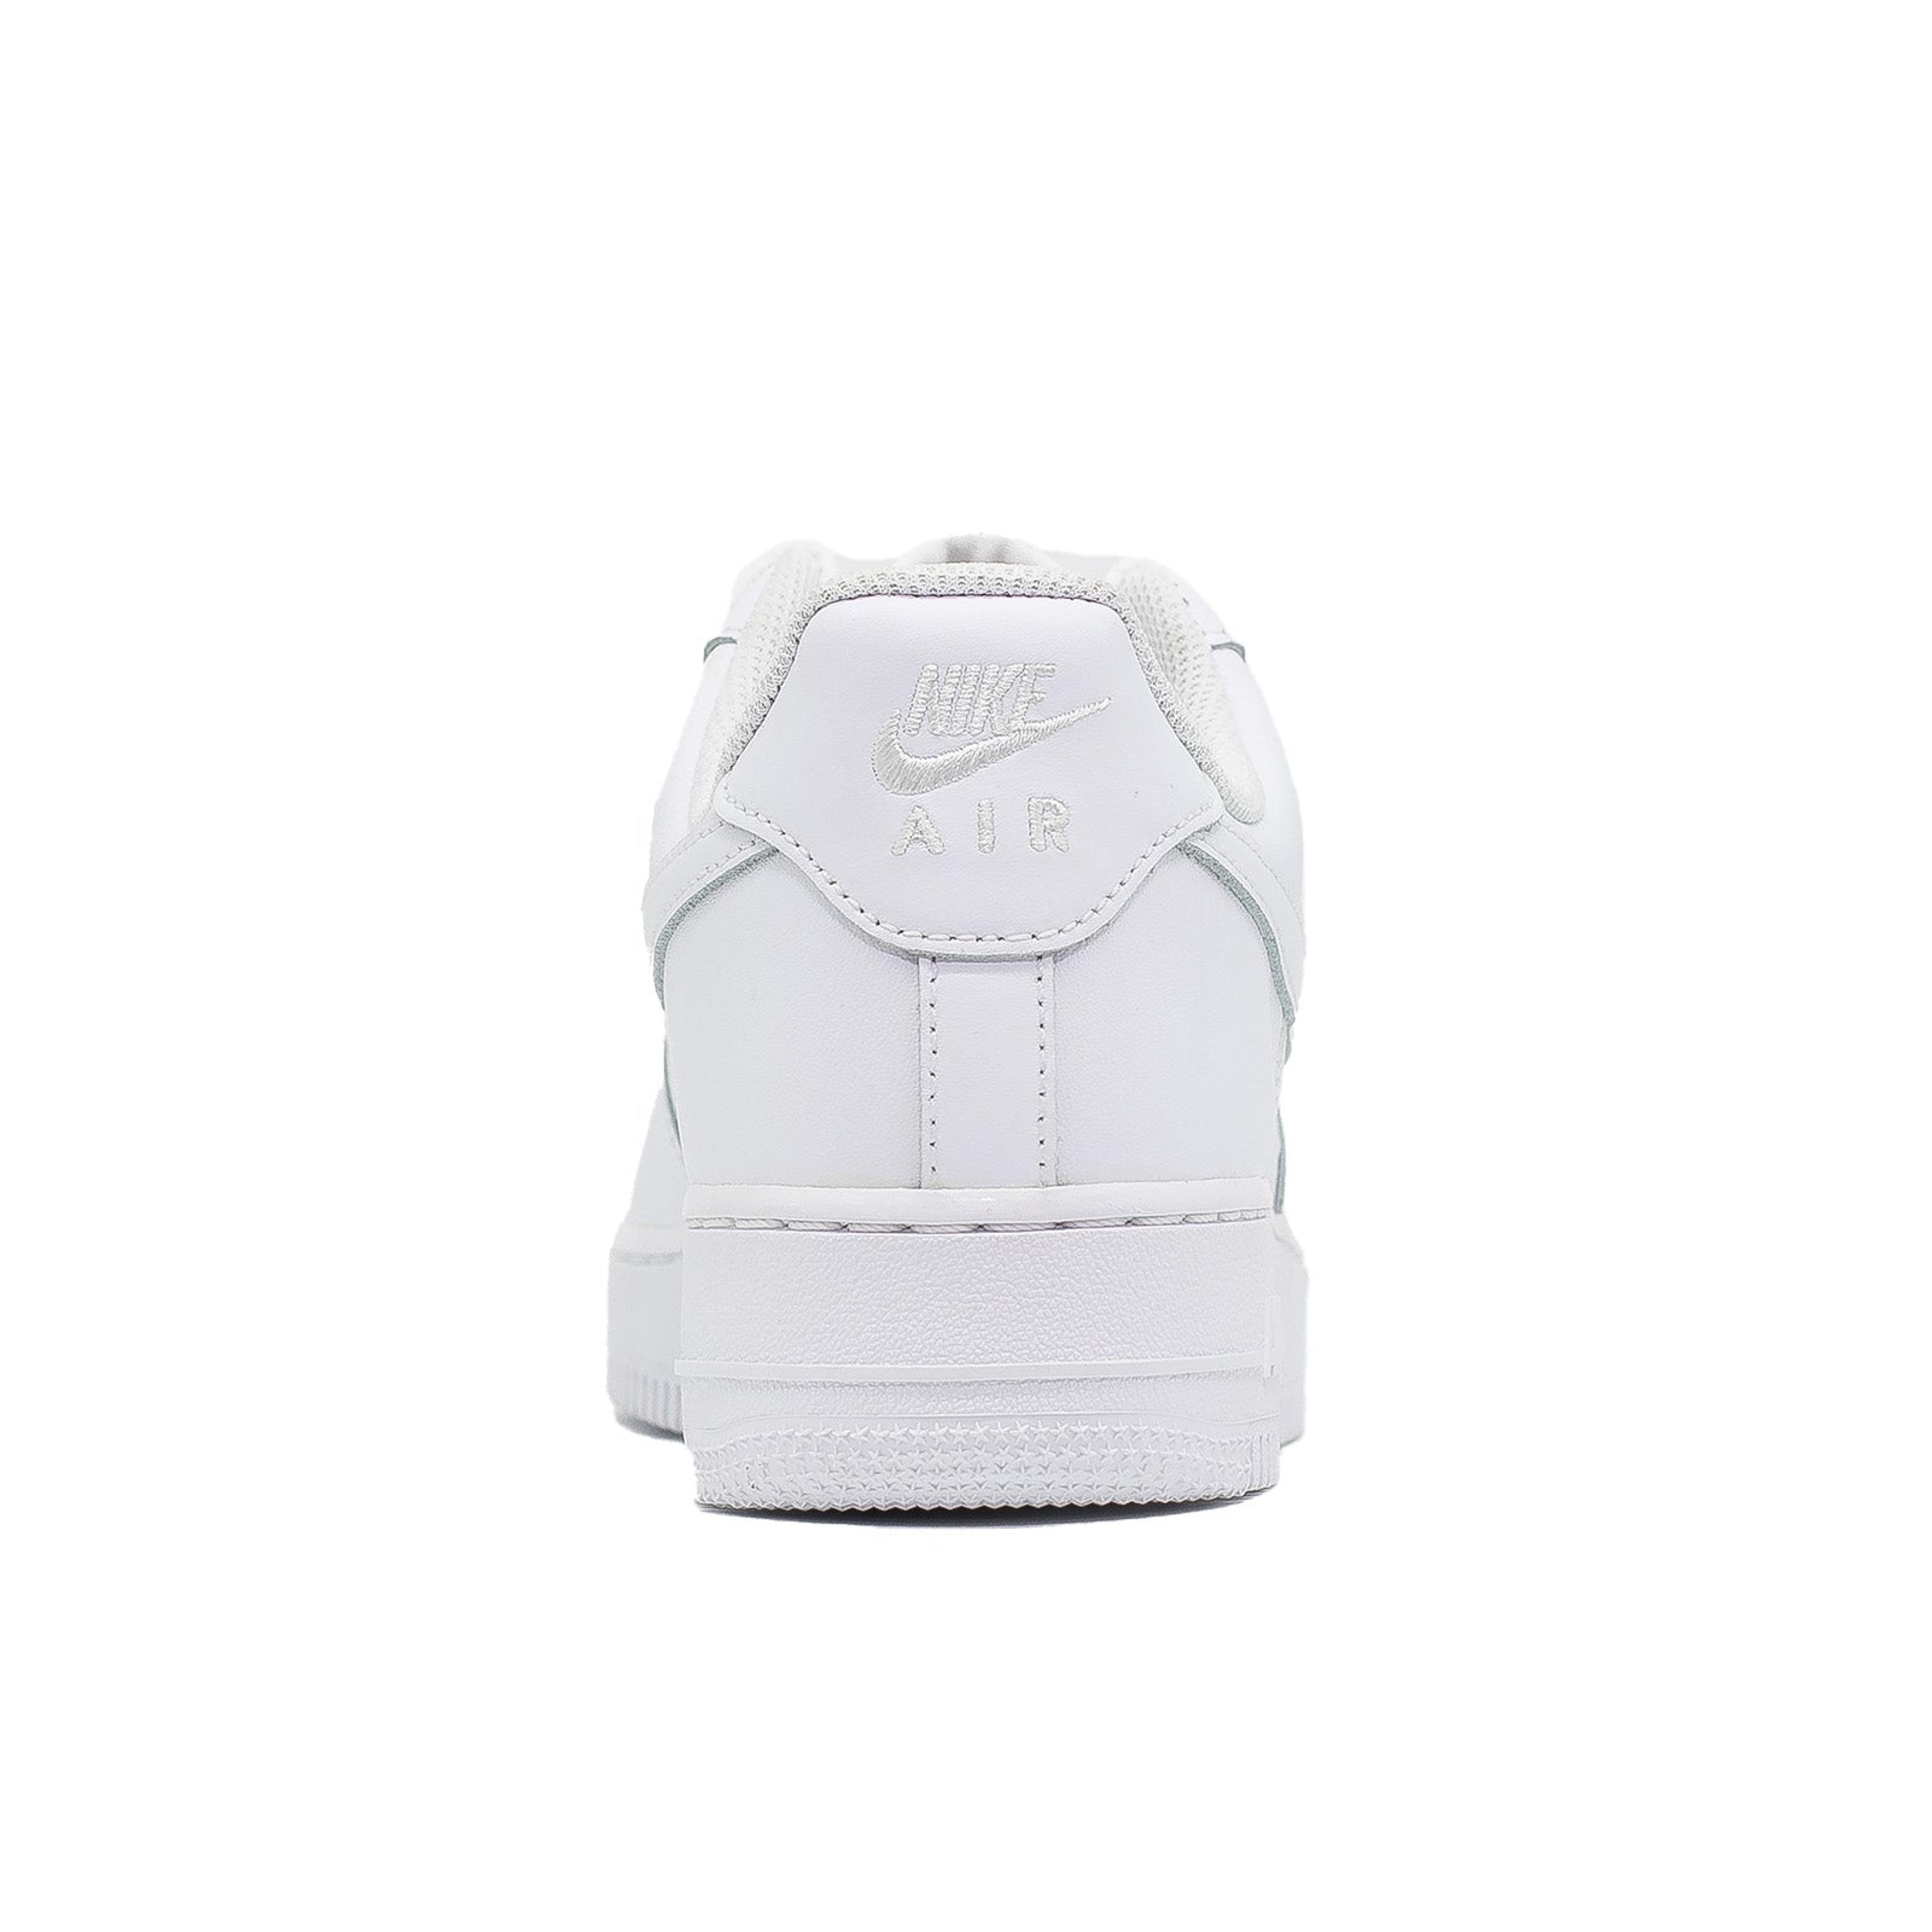 Alternate View 1 of Nike Air Force 1 Low, '07 Triple White